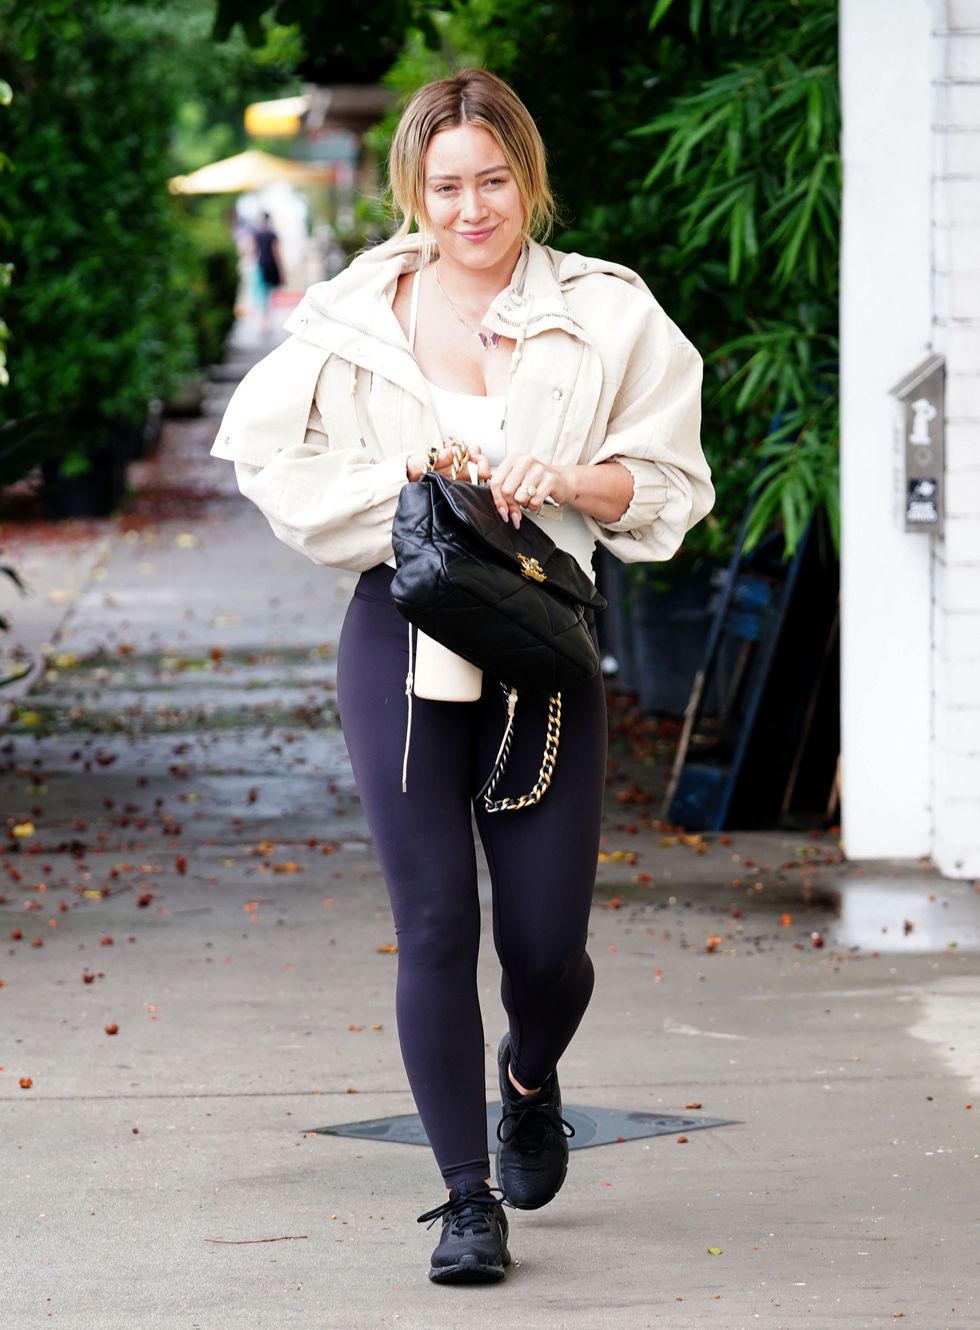 Hilary Duff's Best Street Style and Fashion: PHOTOS – Footwear News